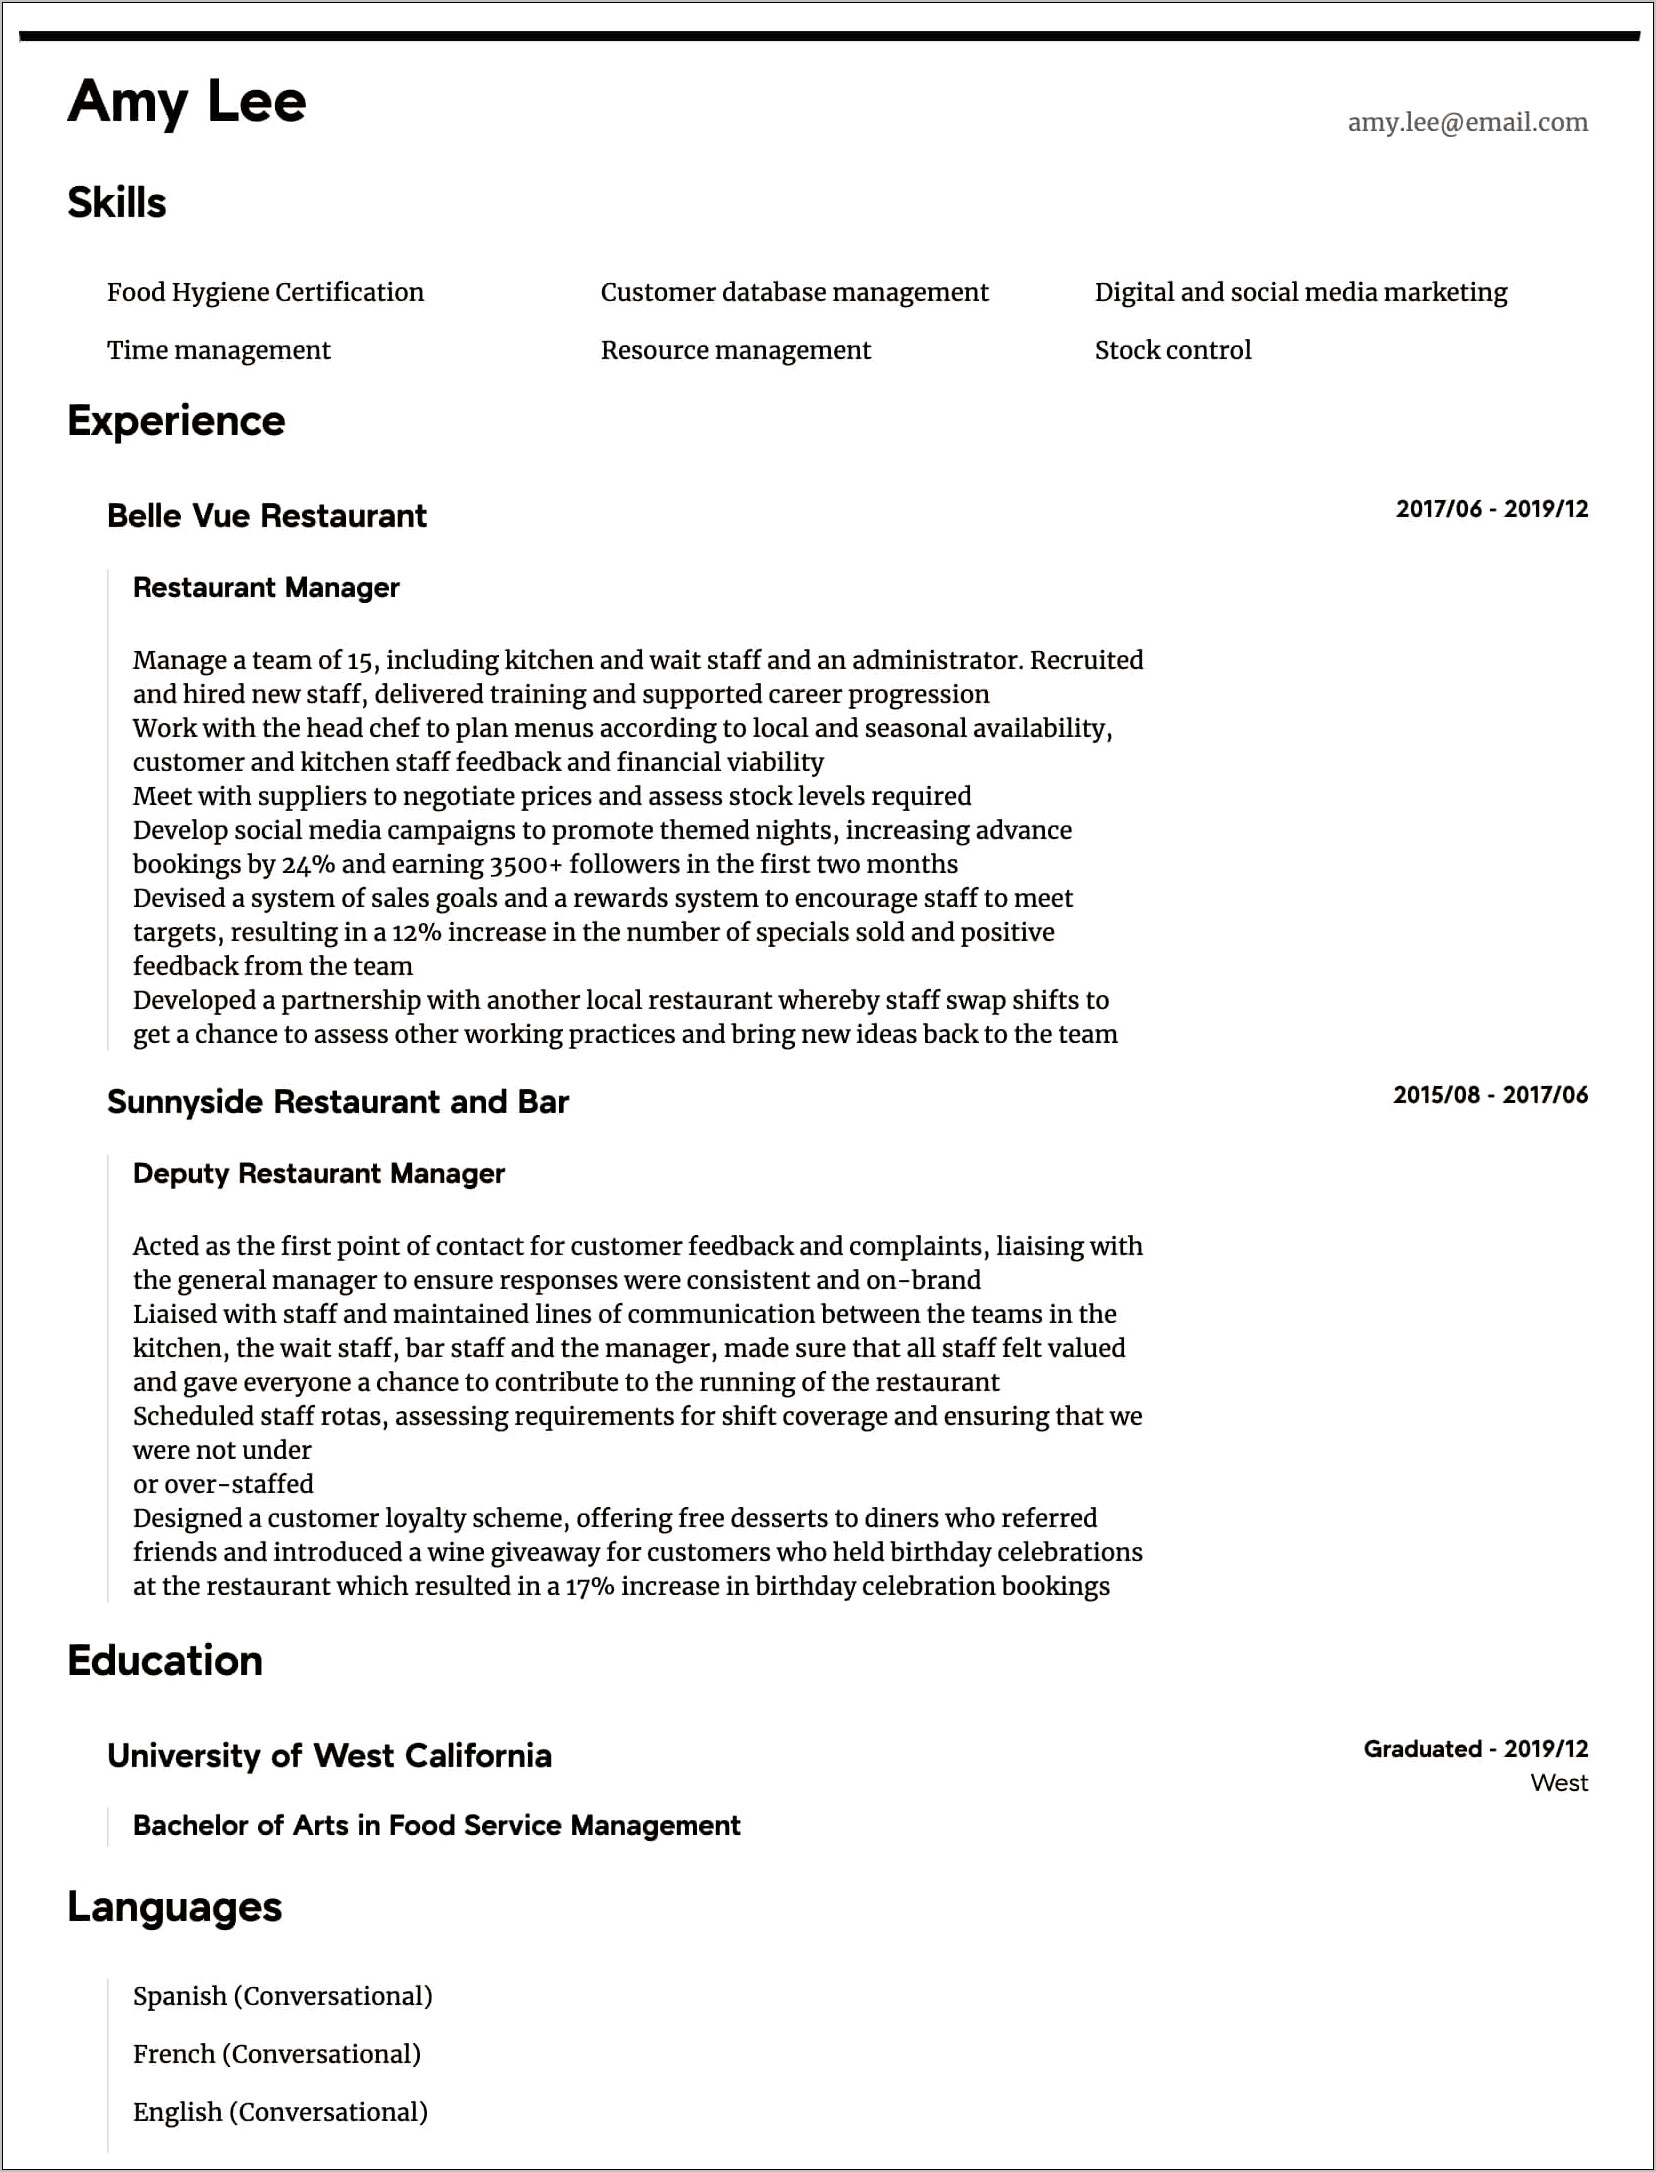 Example Of Resume For Restaurant Manager